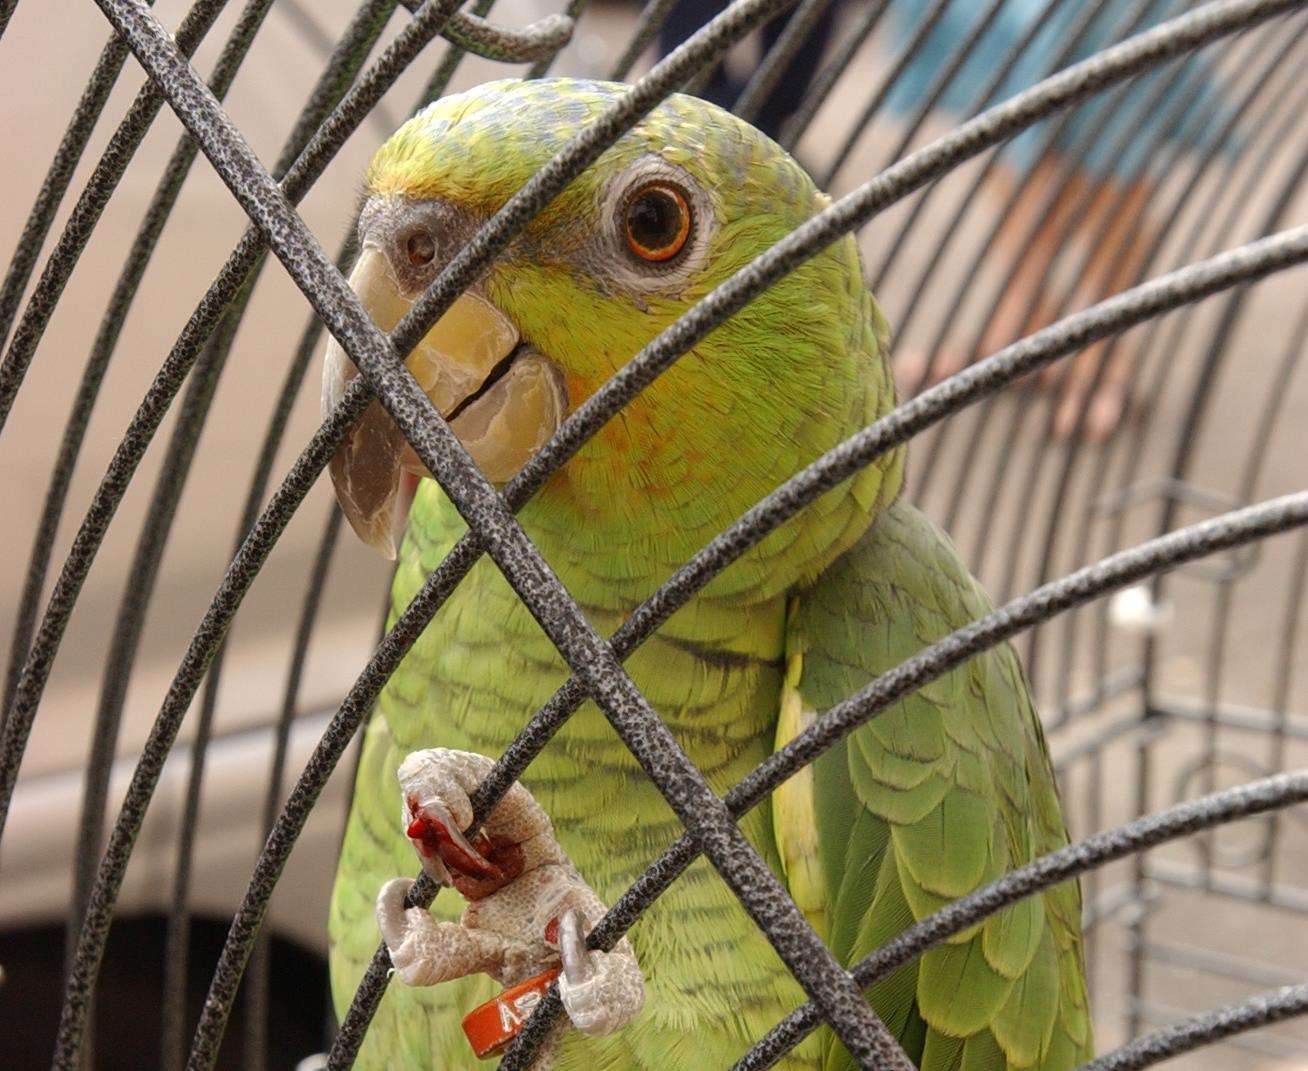 The parrot was stuck in its cage. Stock image